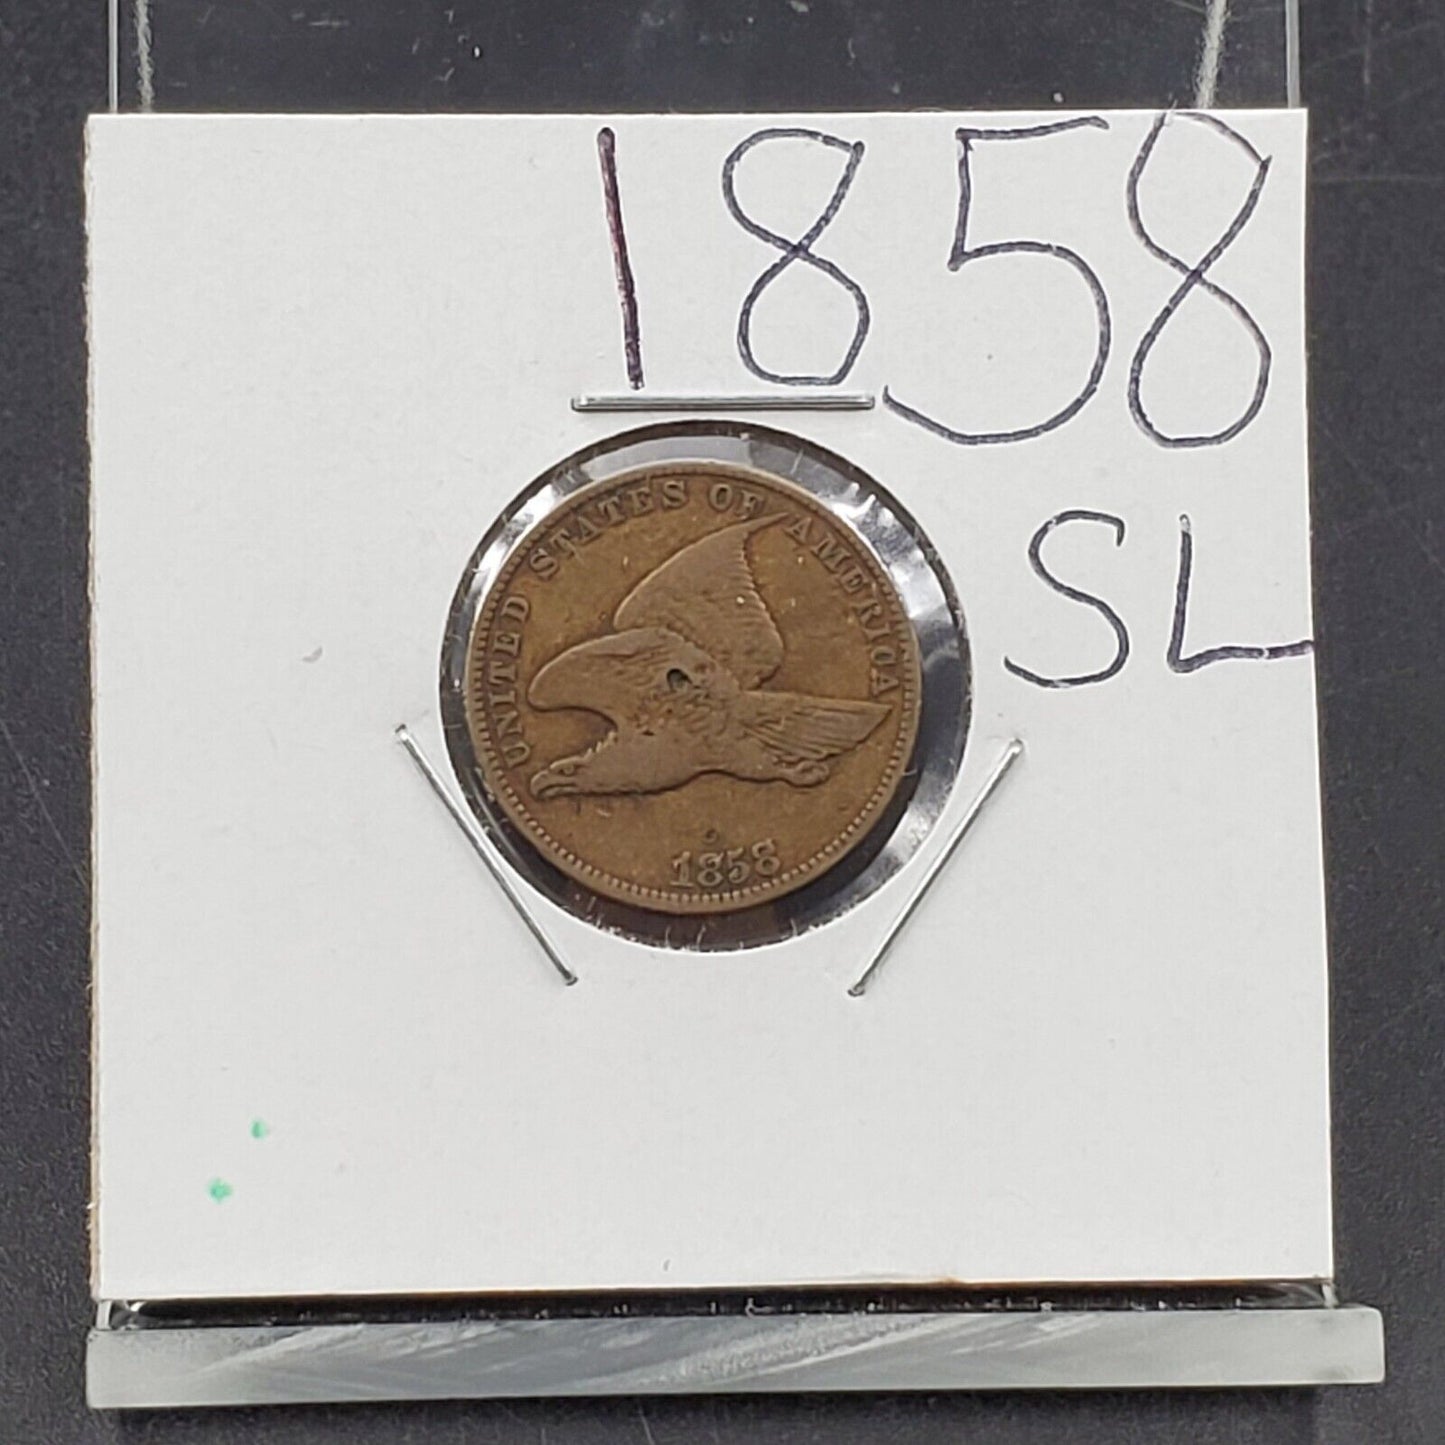 1858 SL Flying Eagle Cent Penny Coin Choice Fine Struck Through Grease Reverse